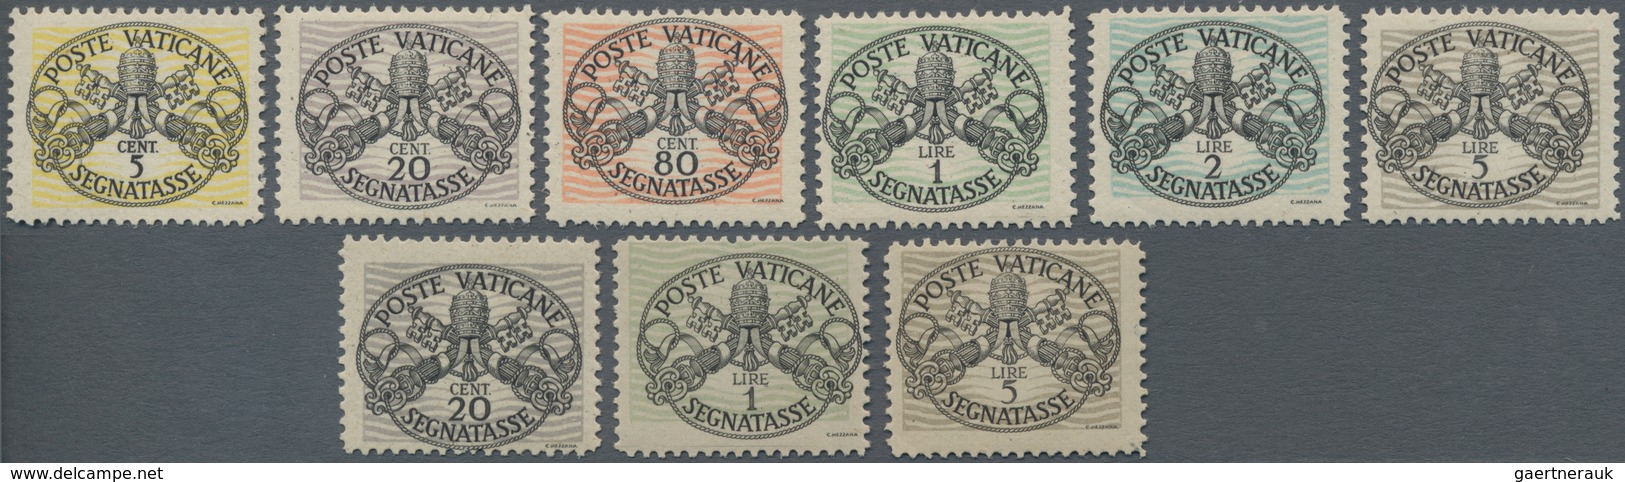 Vatikan - Portomarken: 1946, Coat Of Arms, 5c.-5l. Thick Waves, Normal And Grey Paper, Complete Set - Postage Due